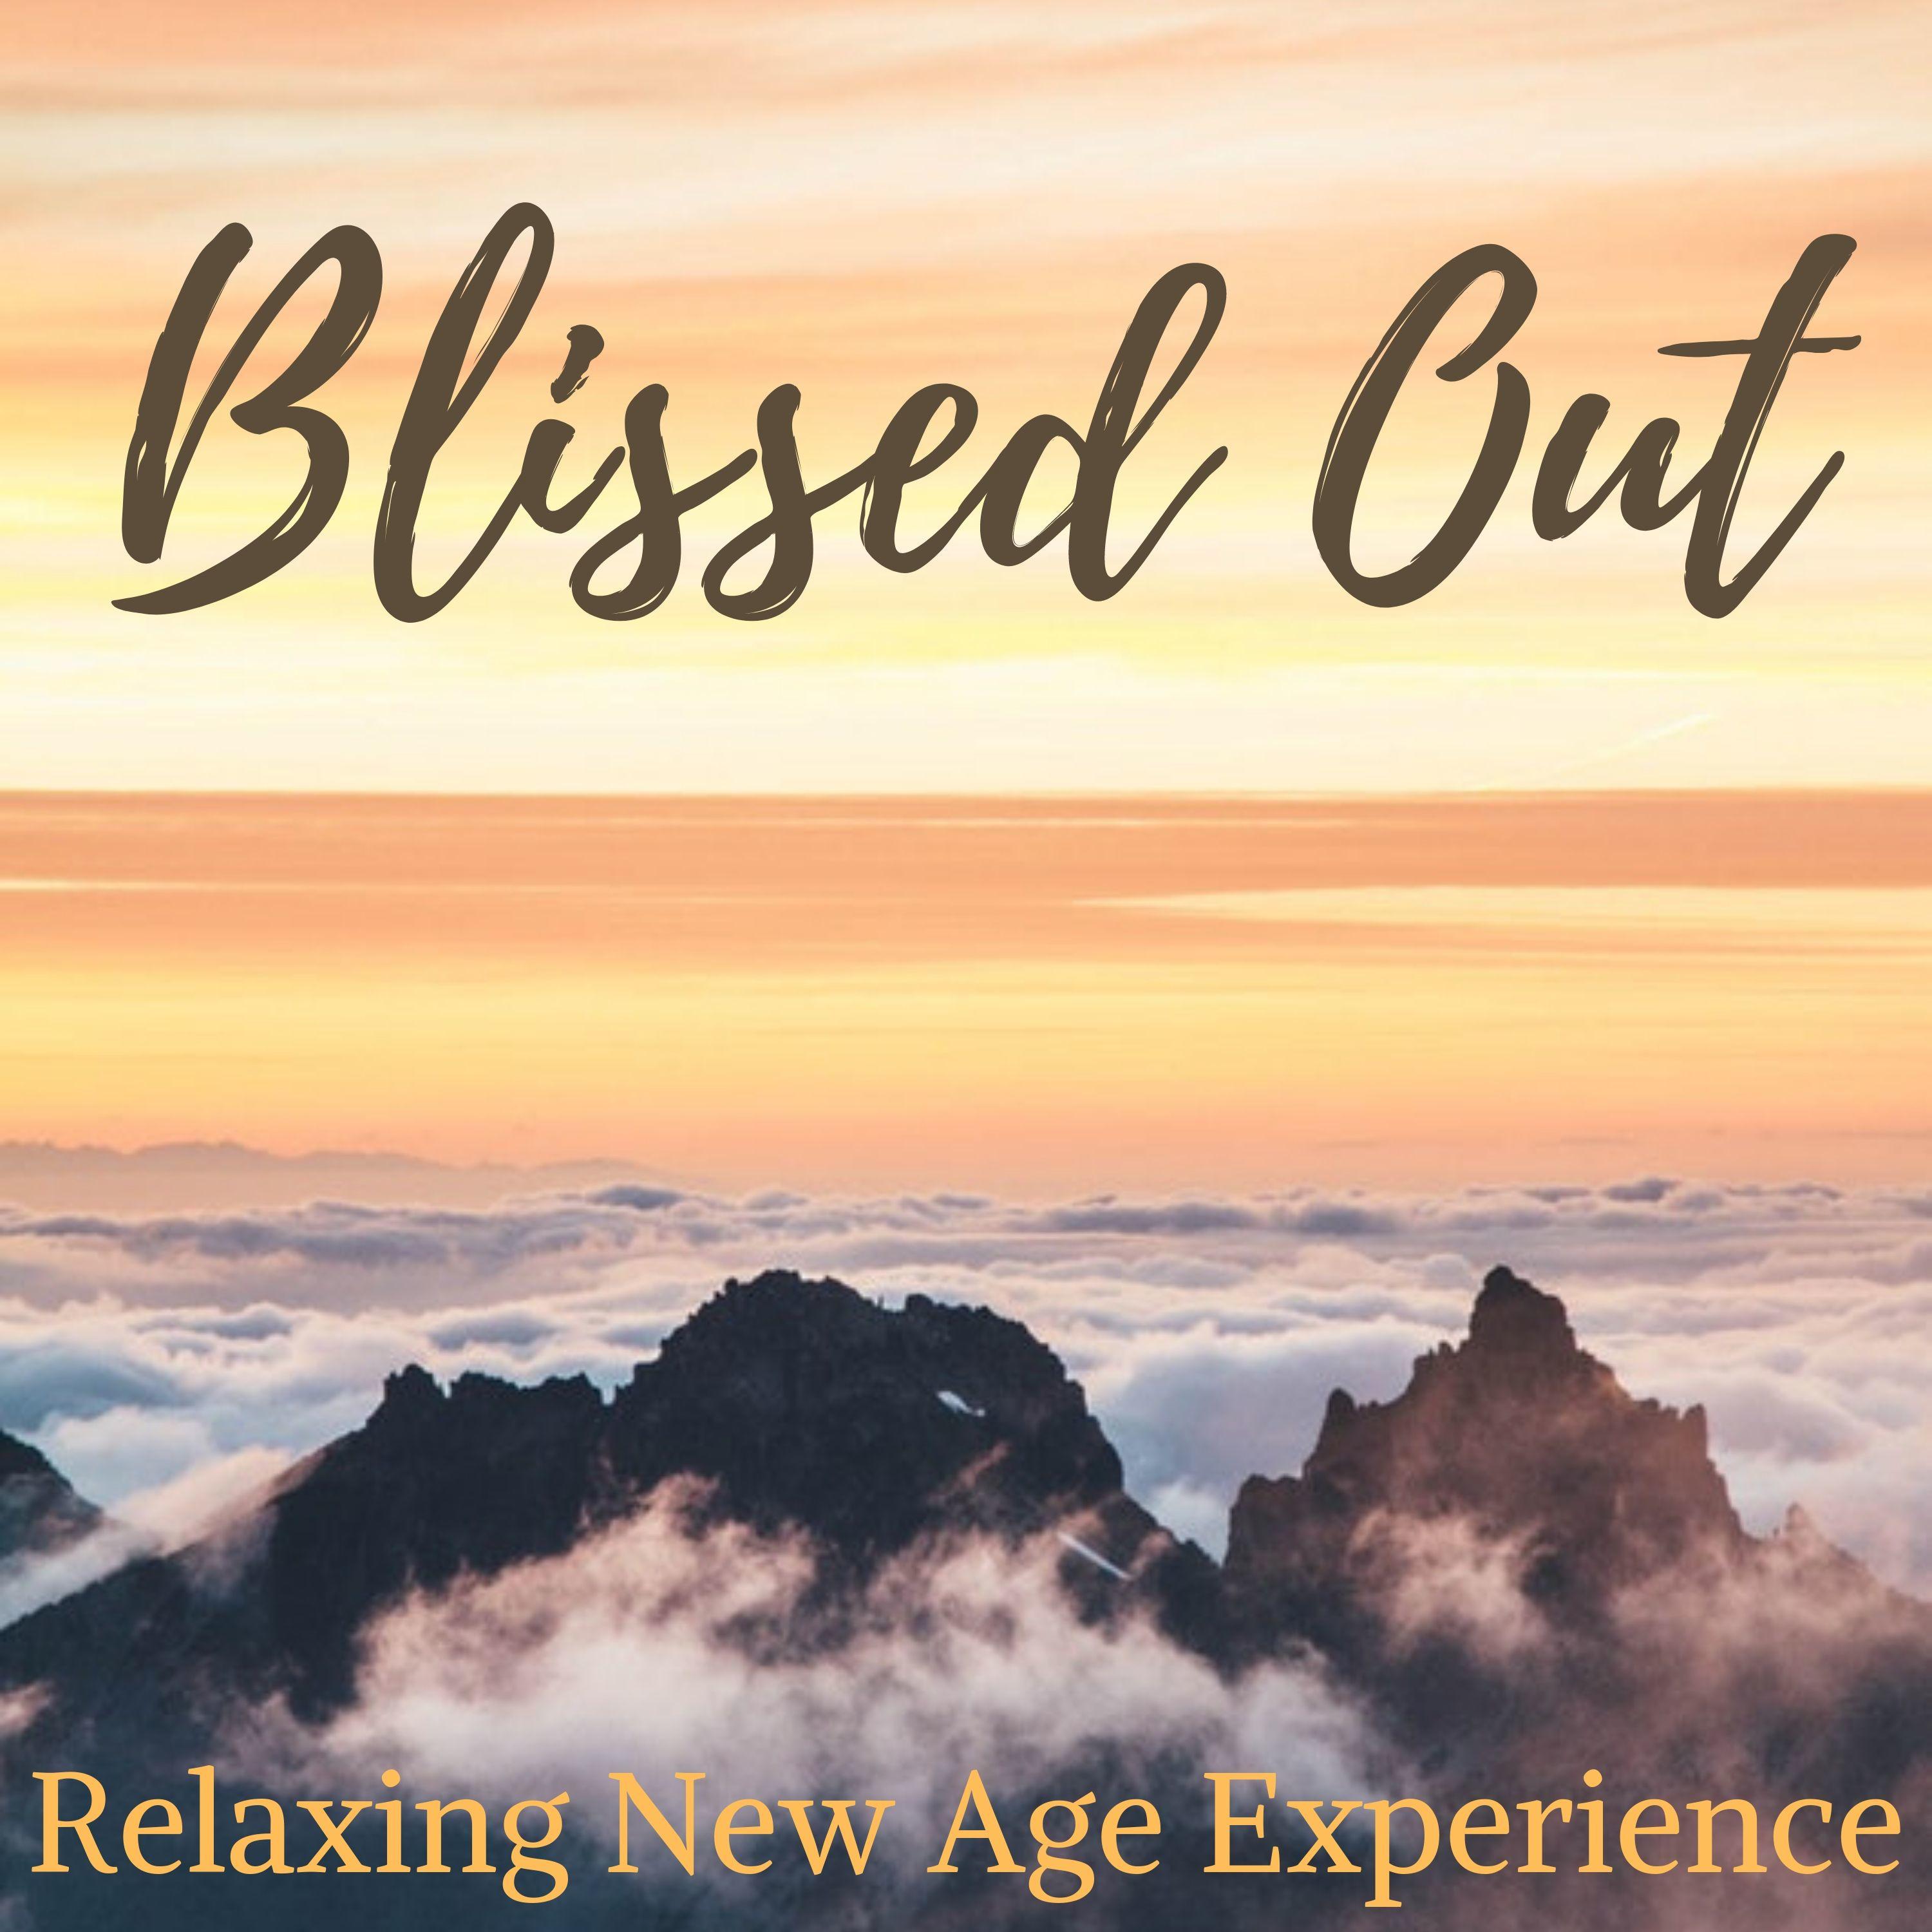 Blissed Out: Relaxing New Age Experience